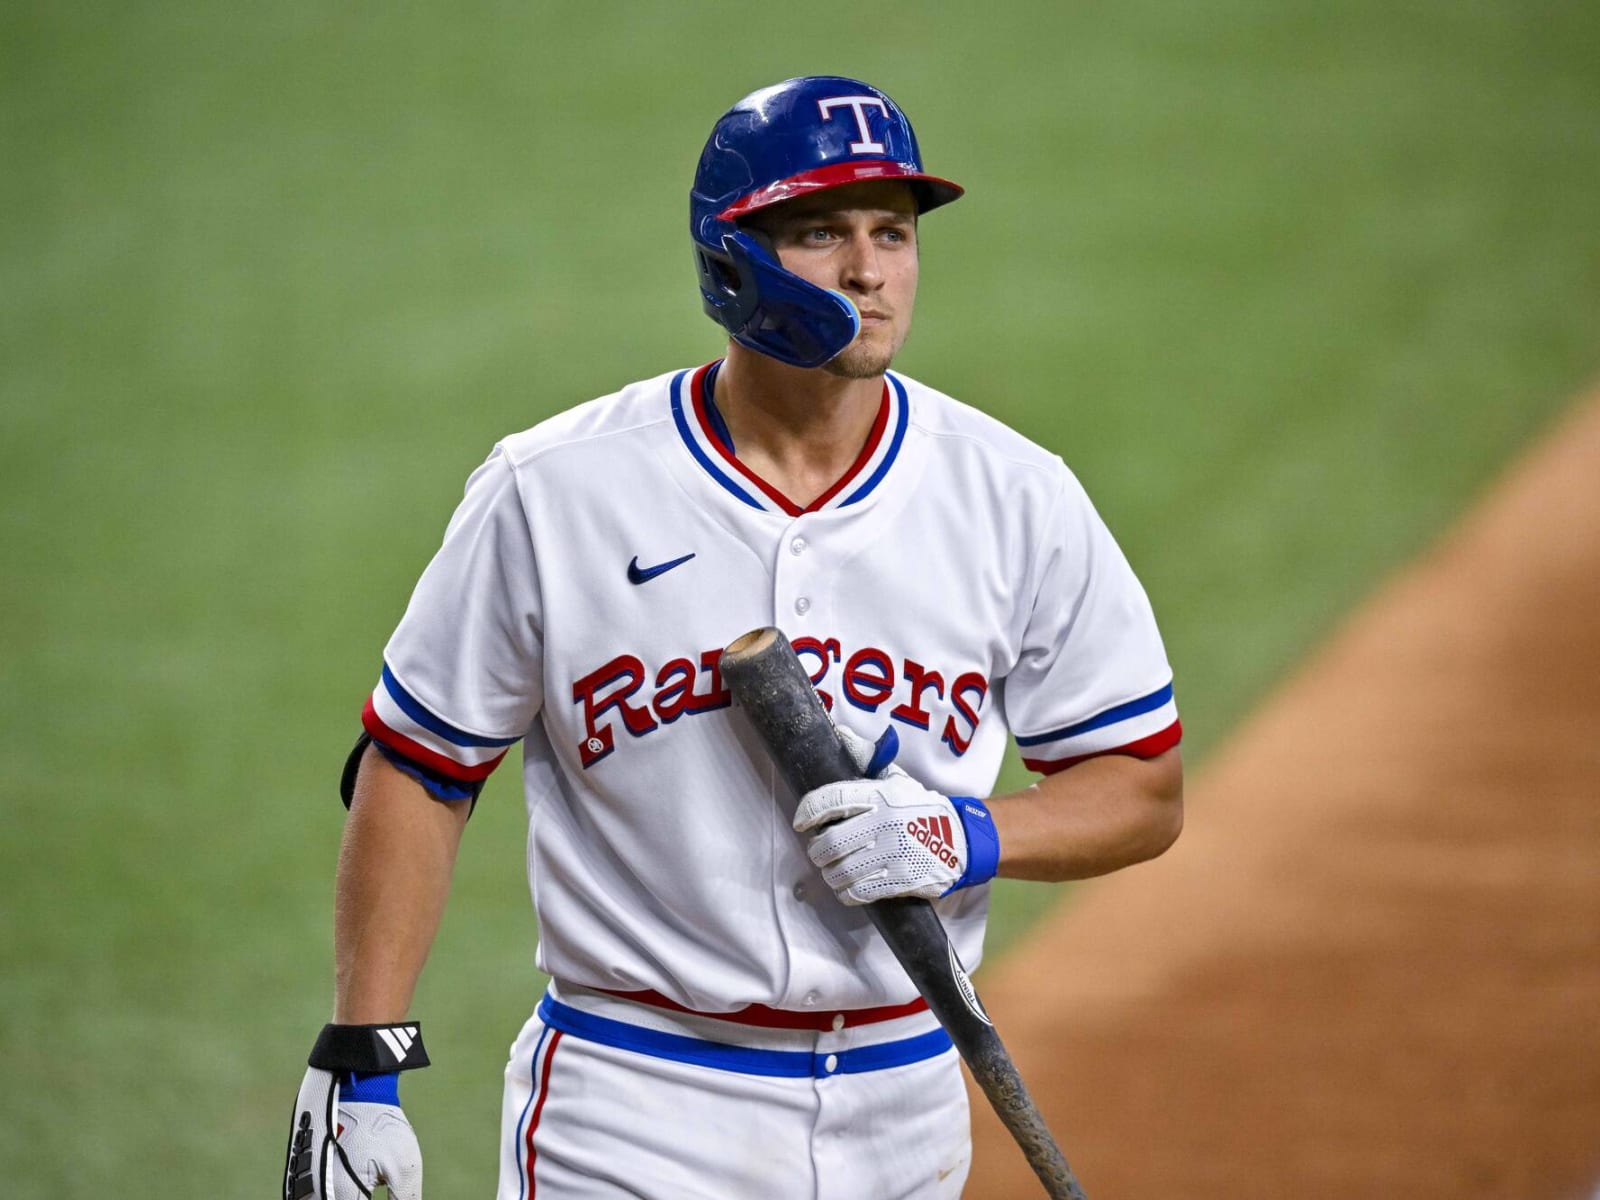 Rangers manager reveals when Corey Seager could return